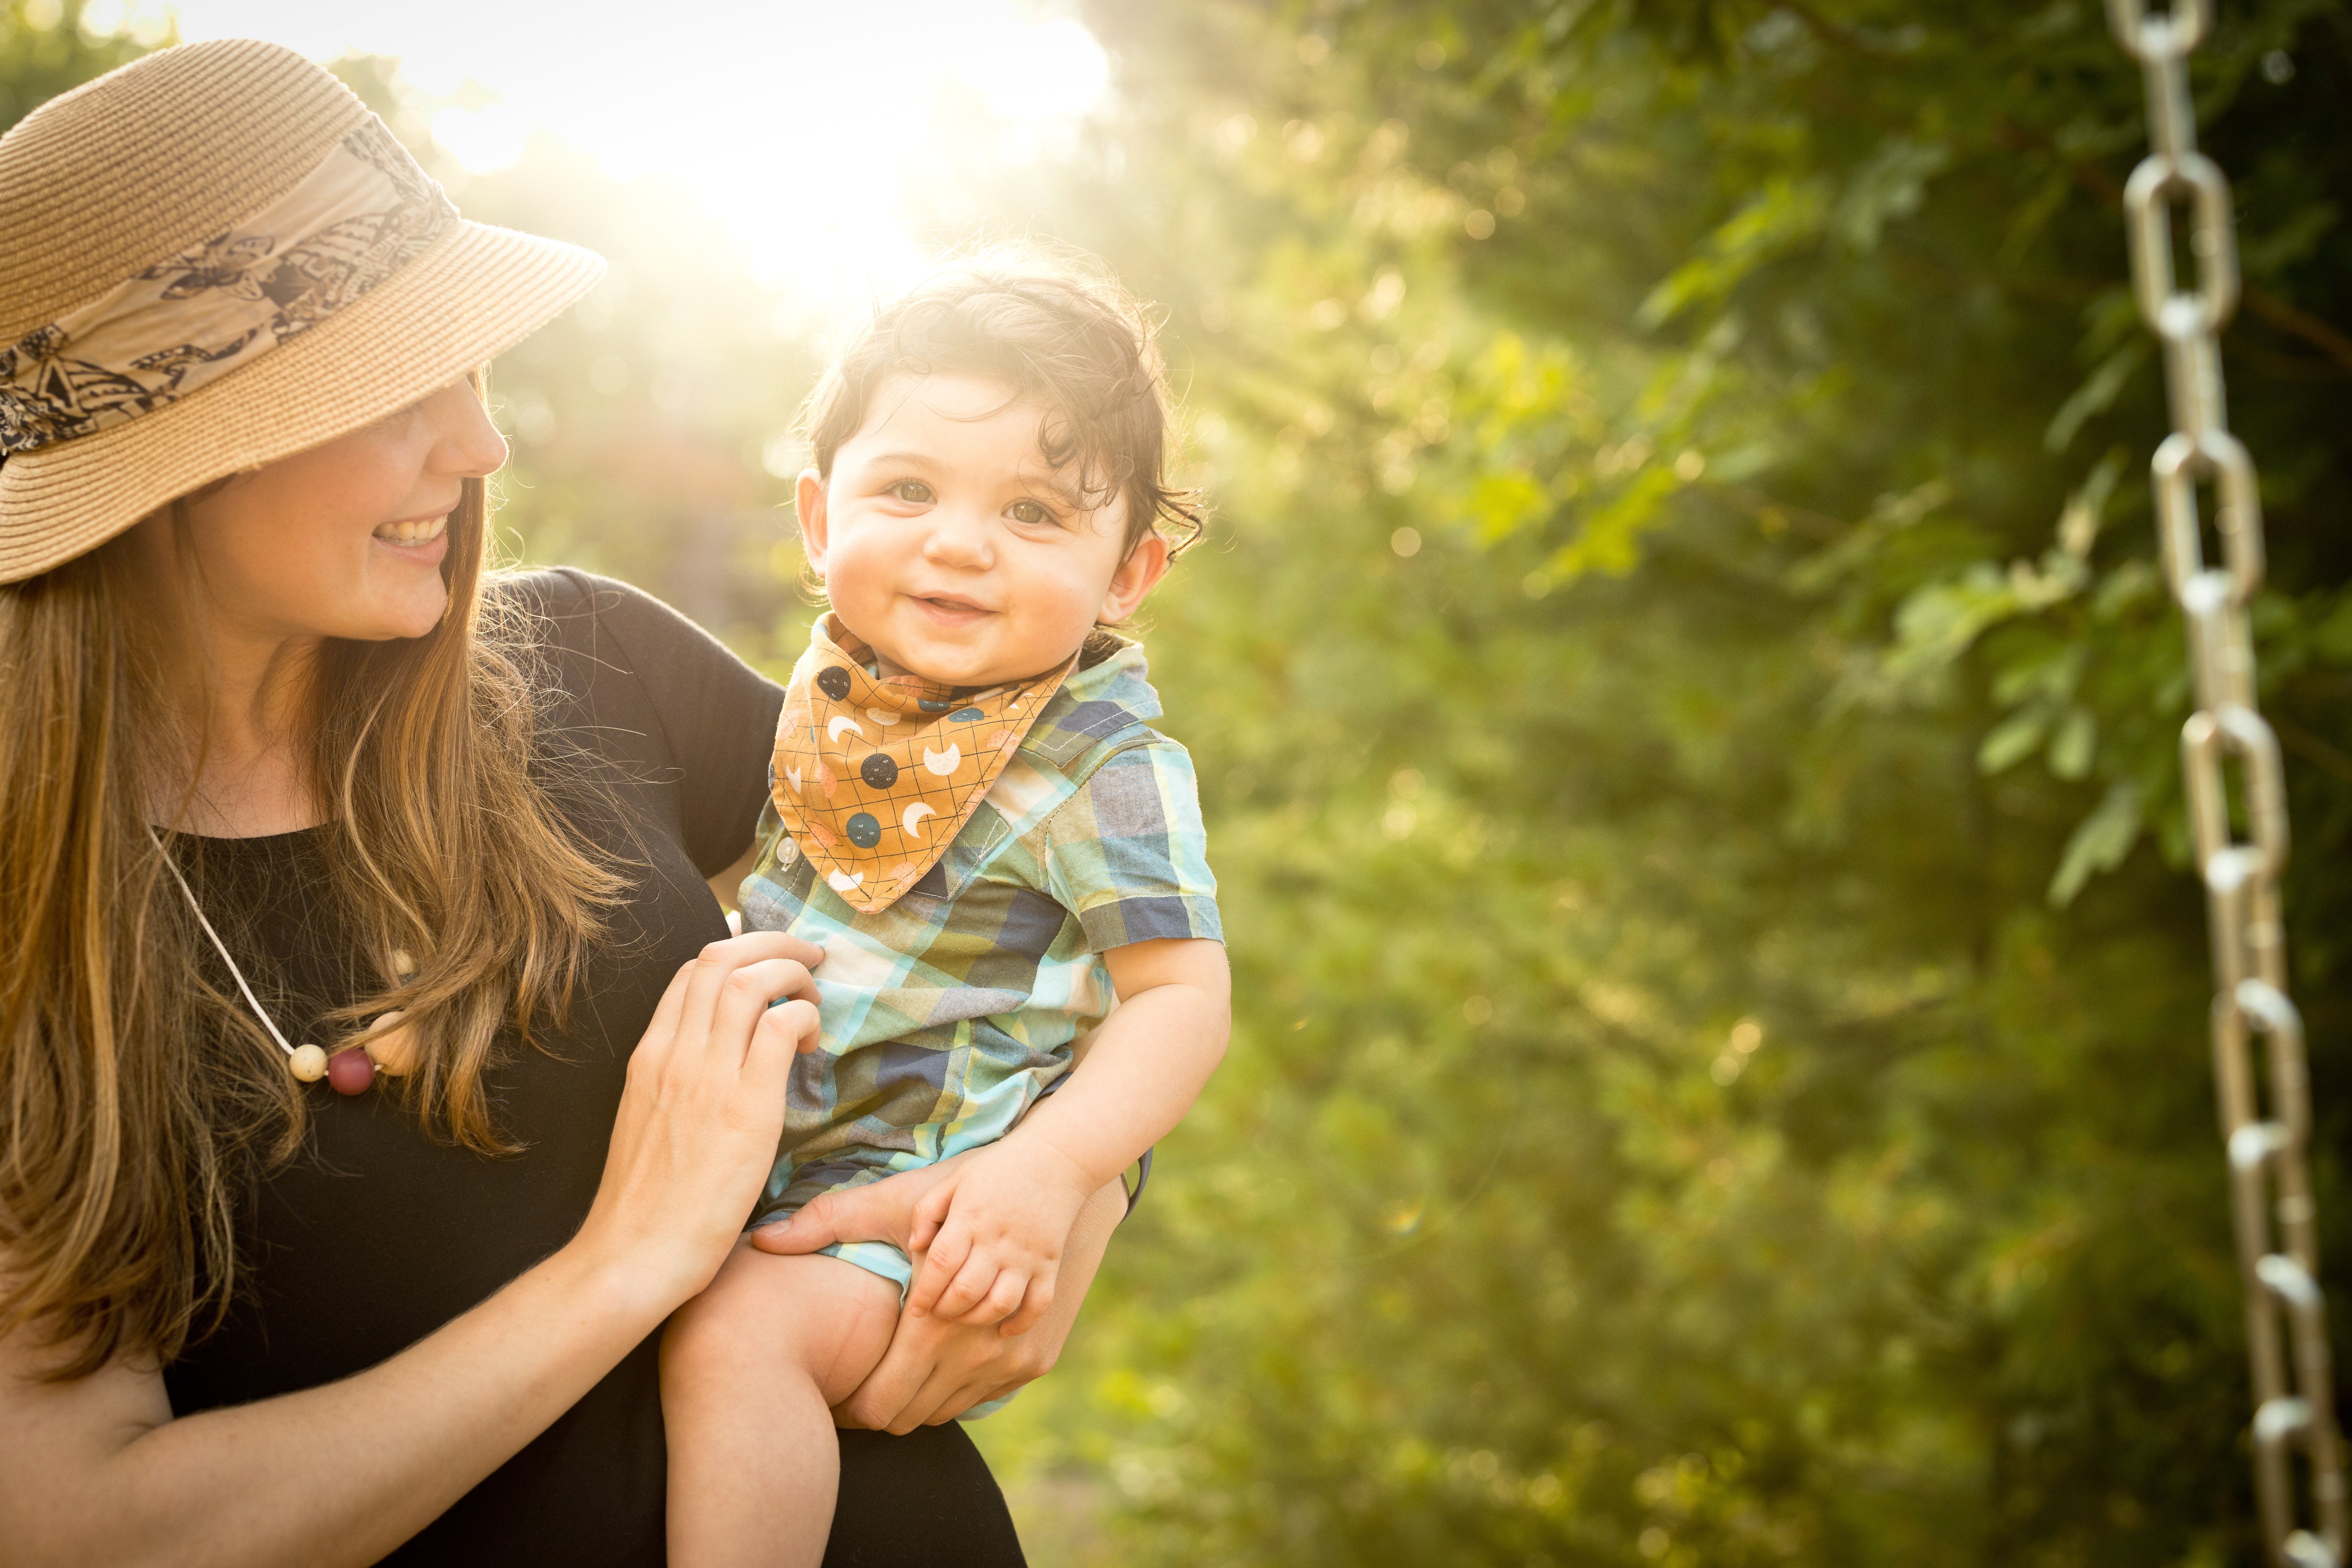 photo of a mother in a sun hat holding her baby surrounded by trees